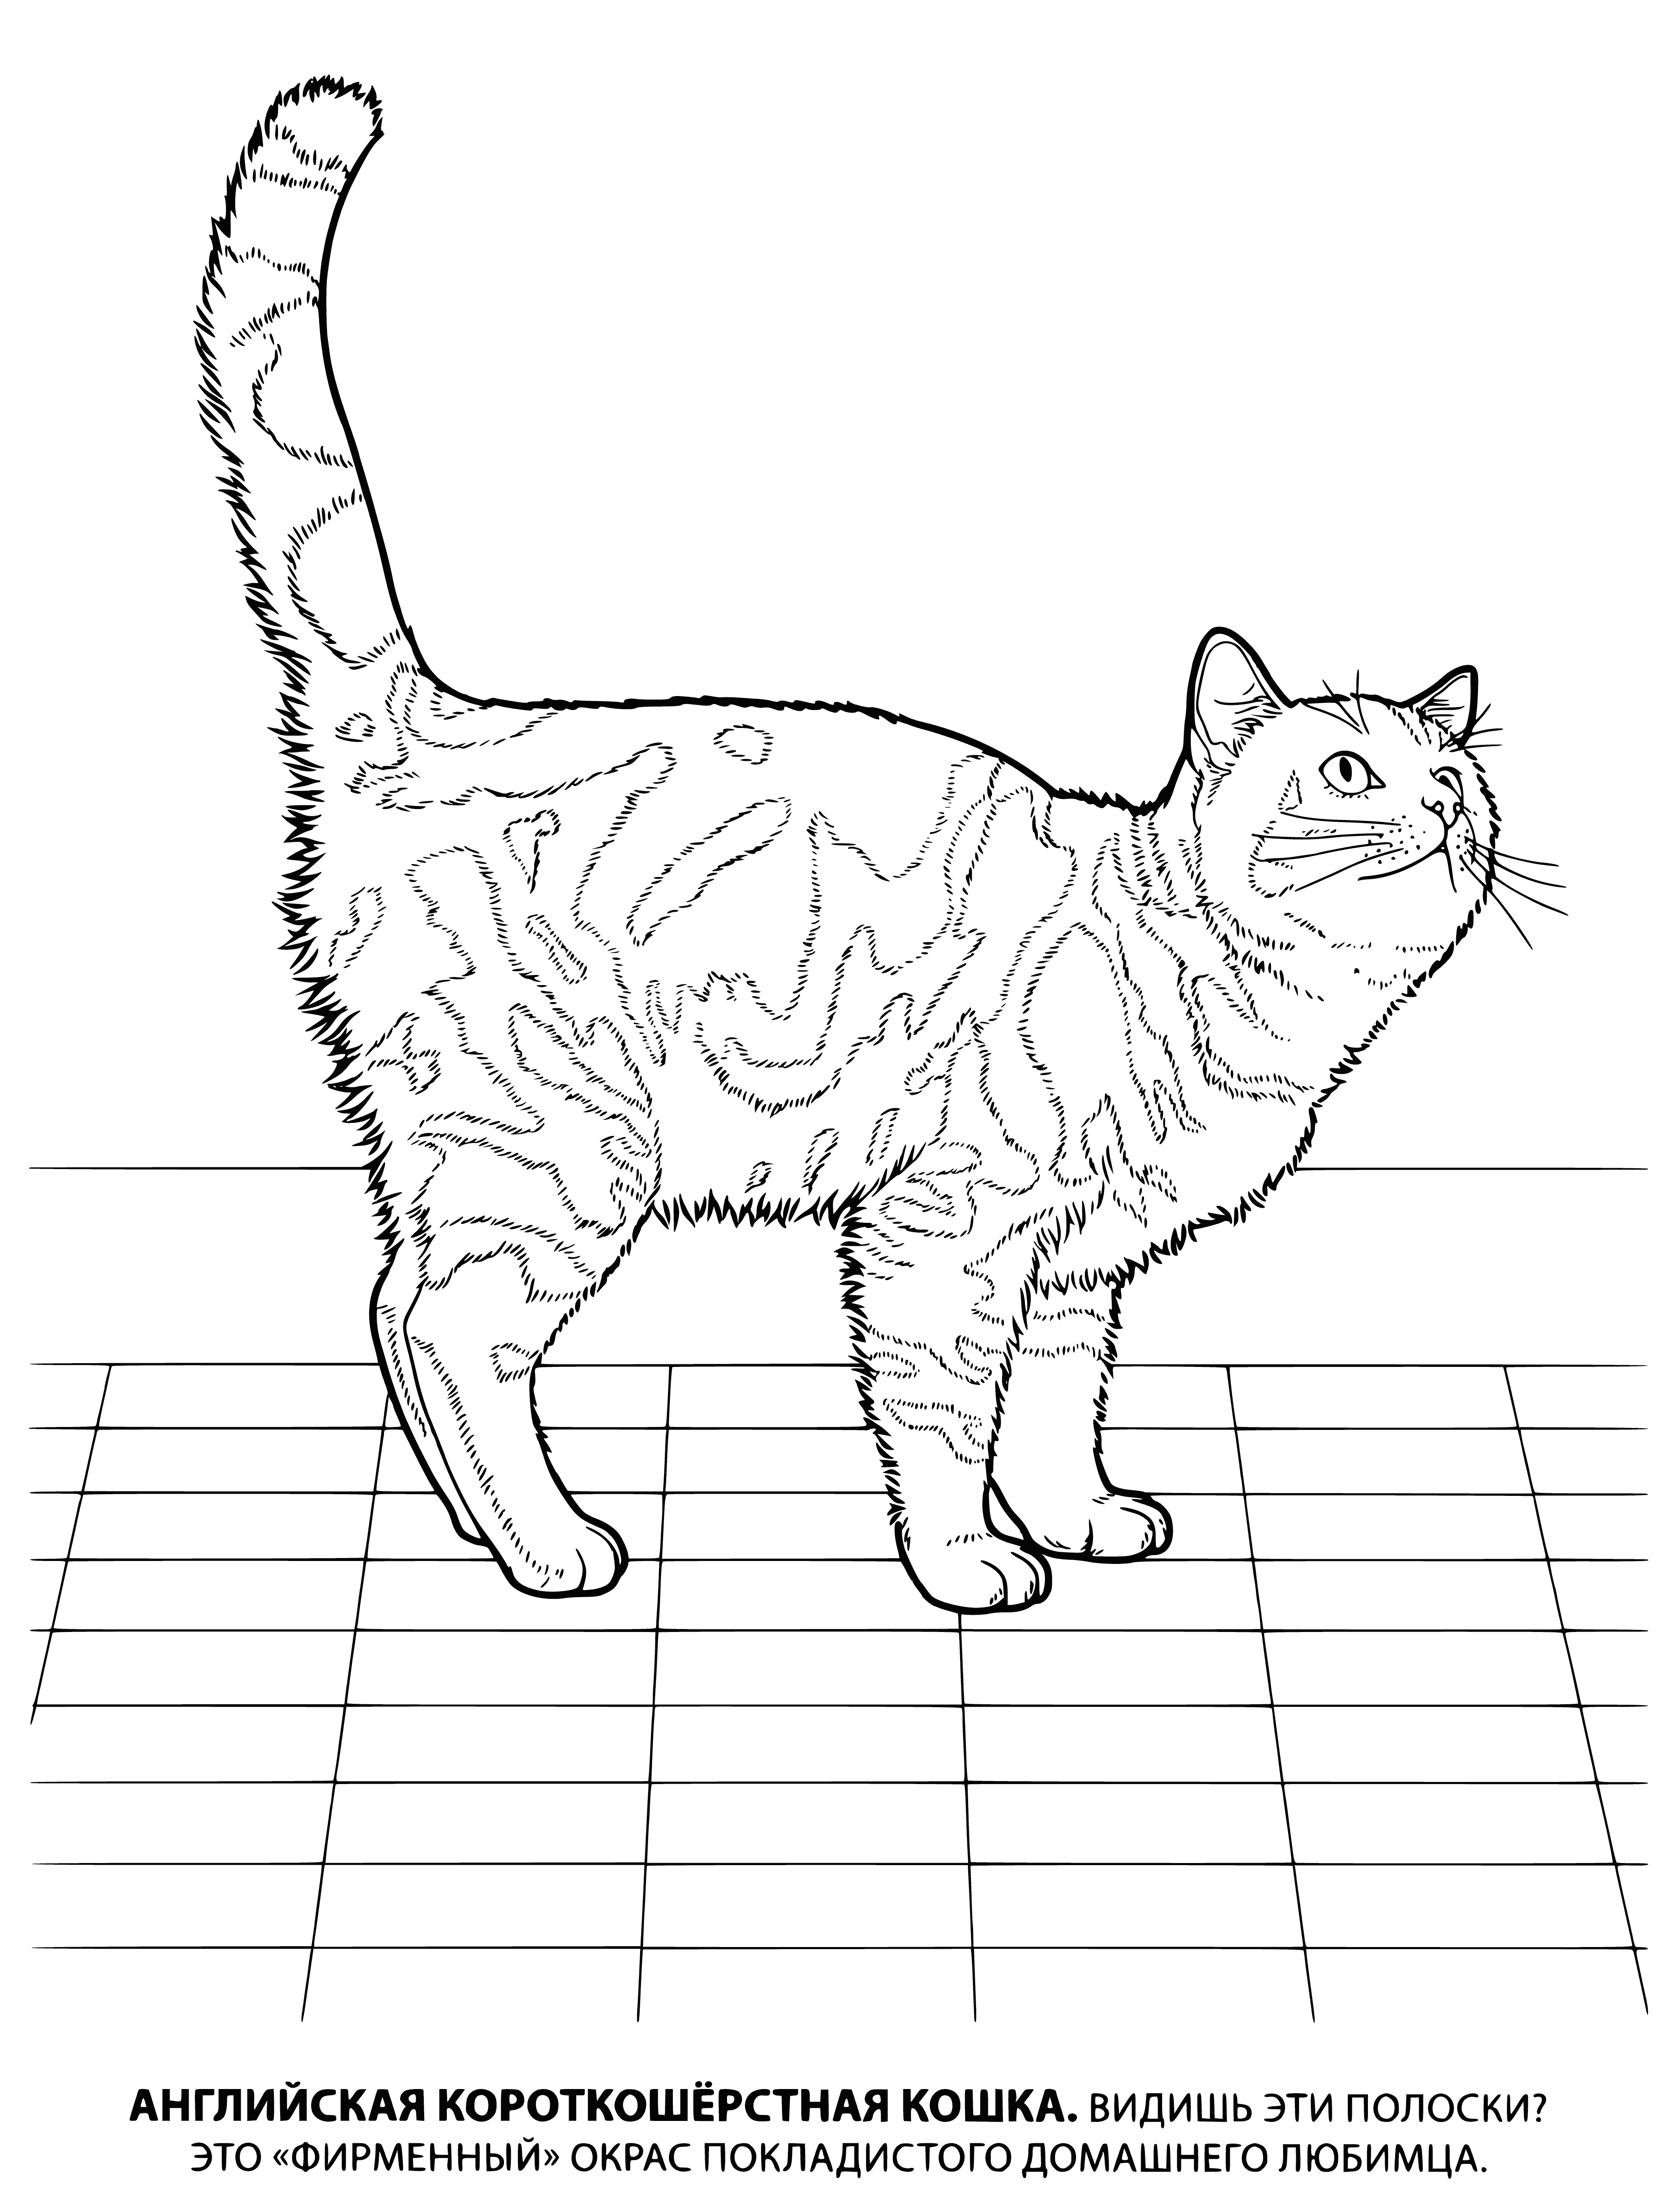 English shorthair coloring page